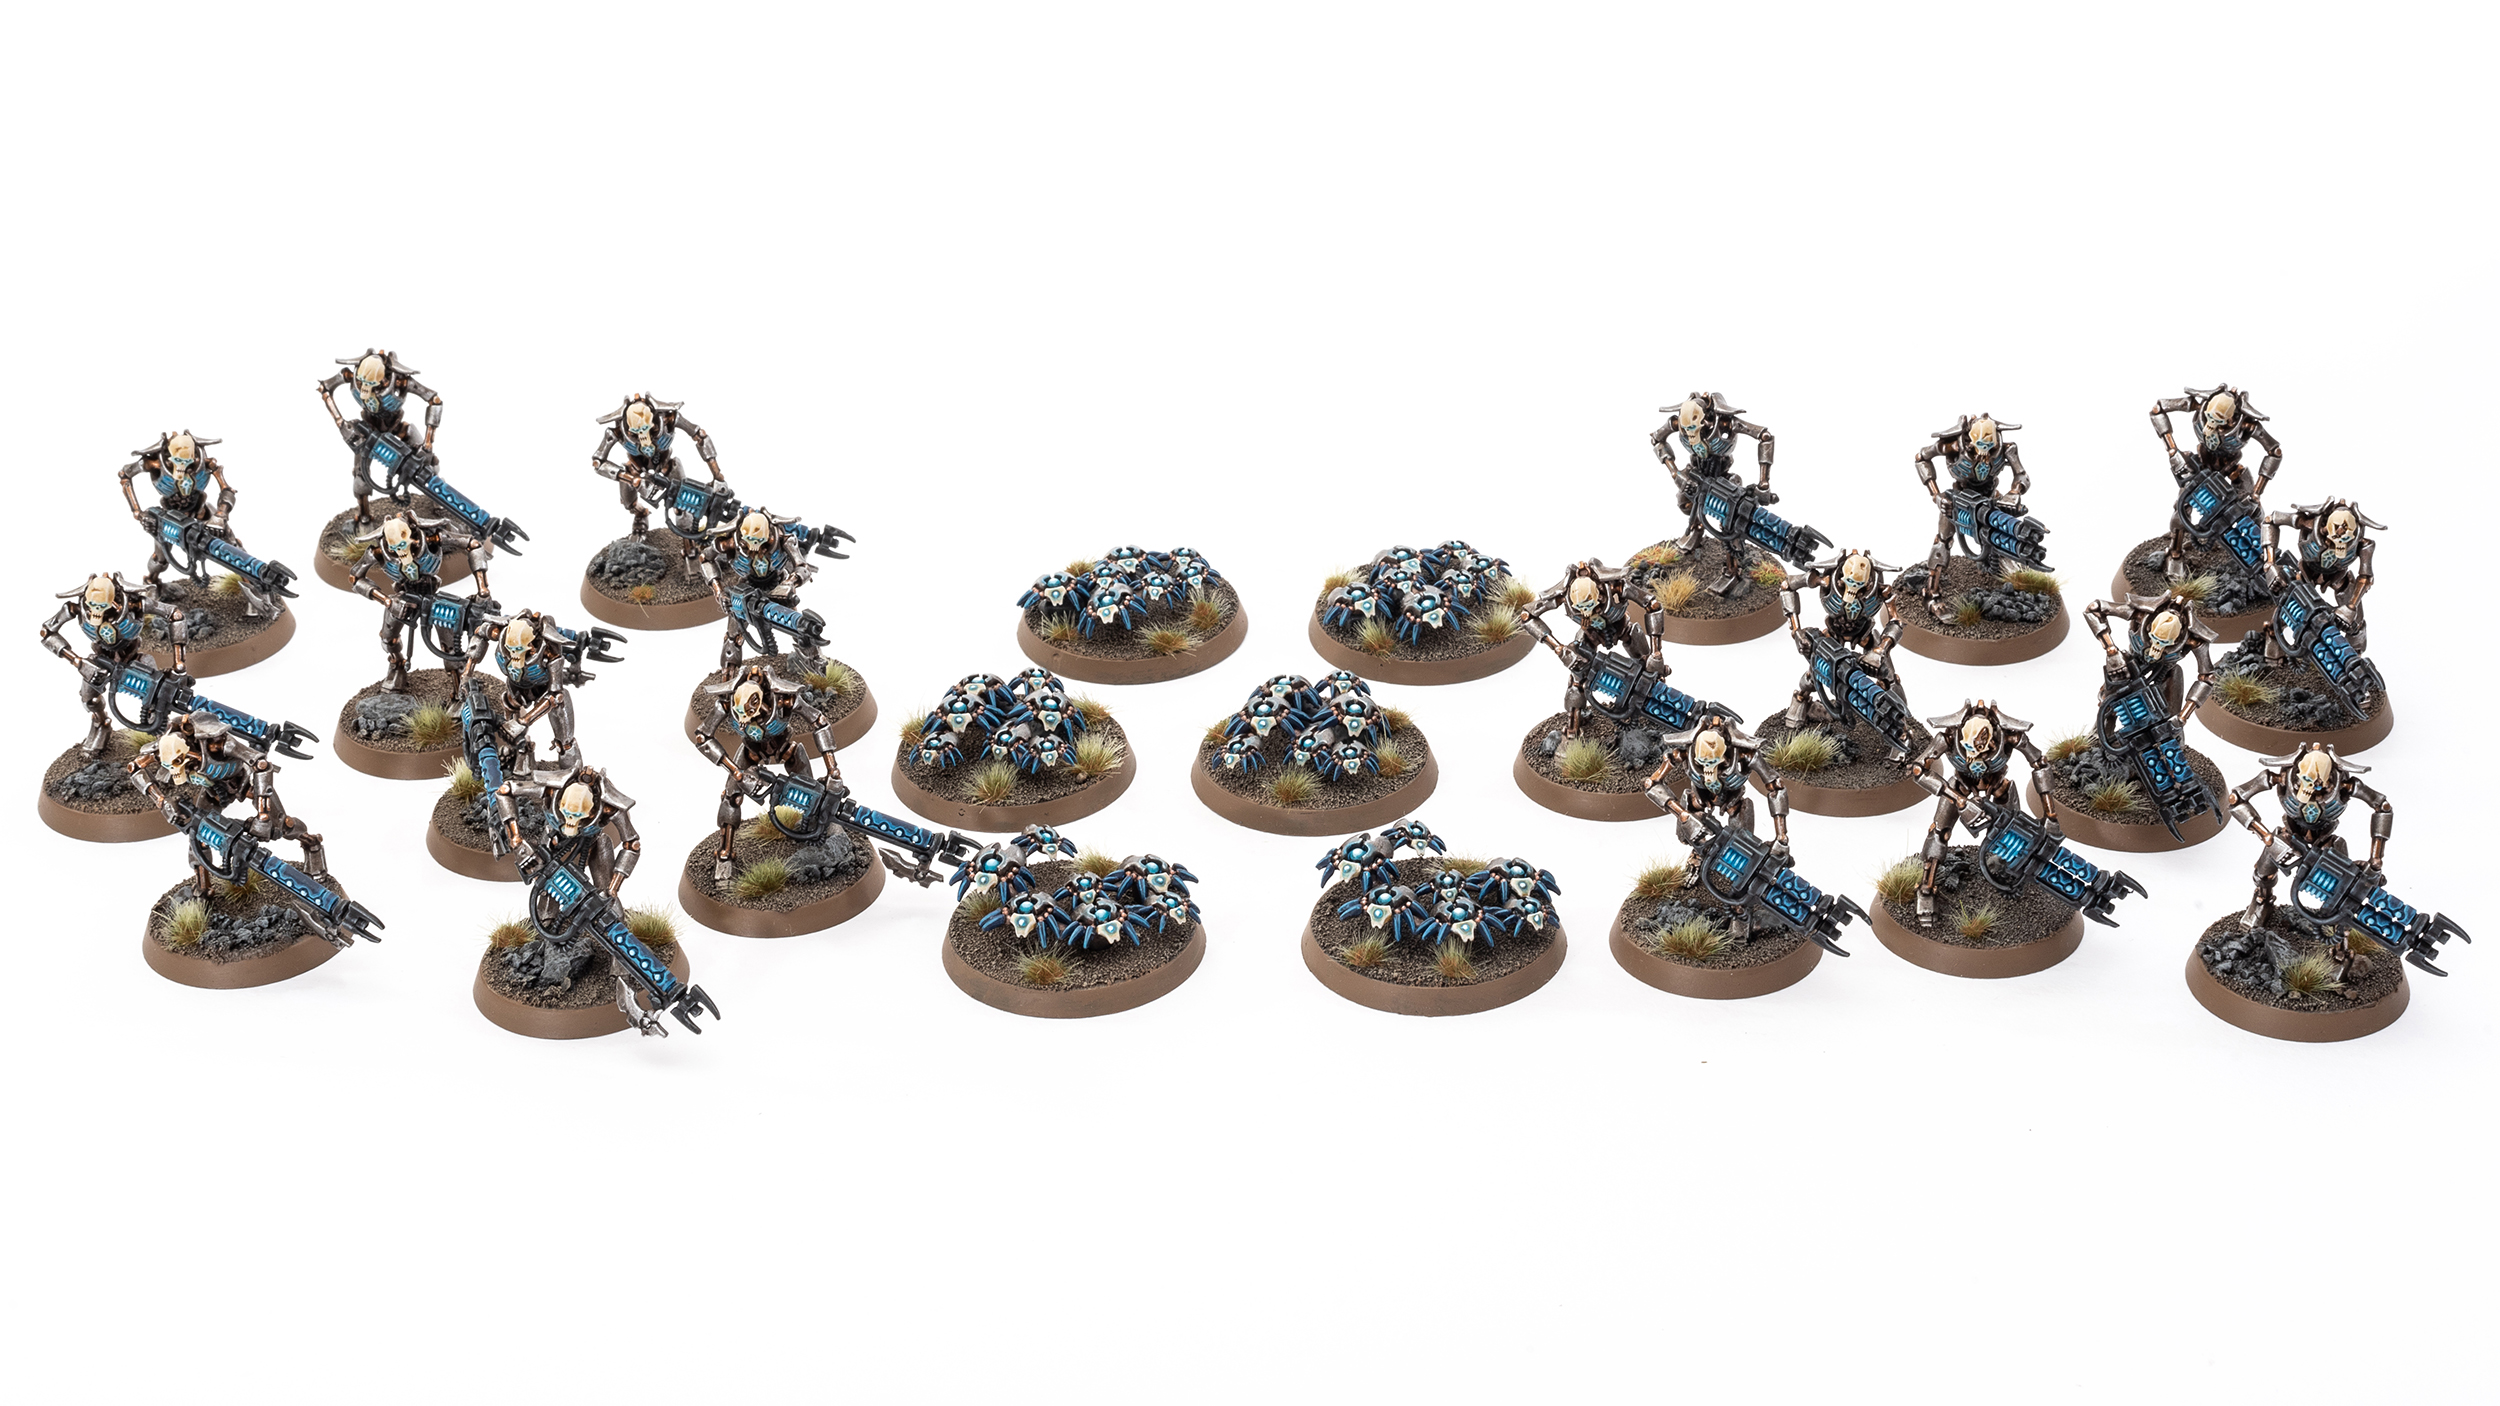 Group shot of Necron Warriors and Scarabs